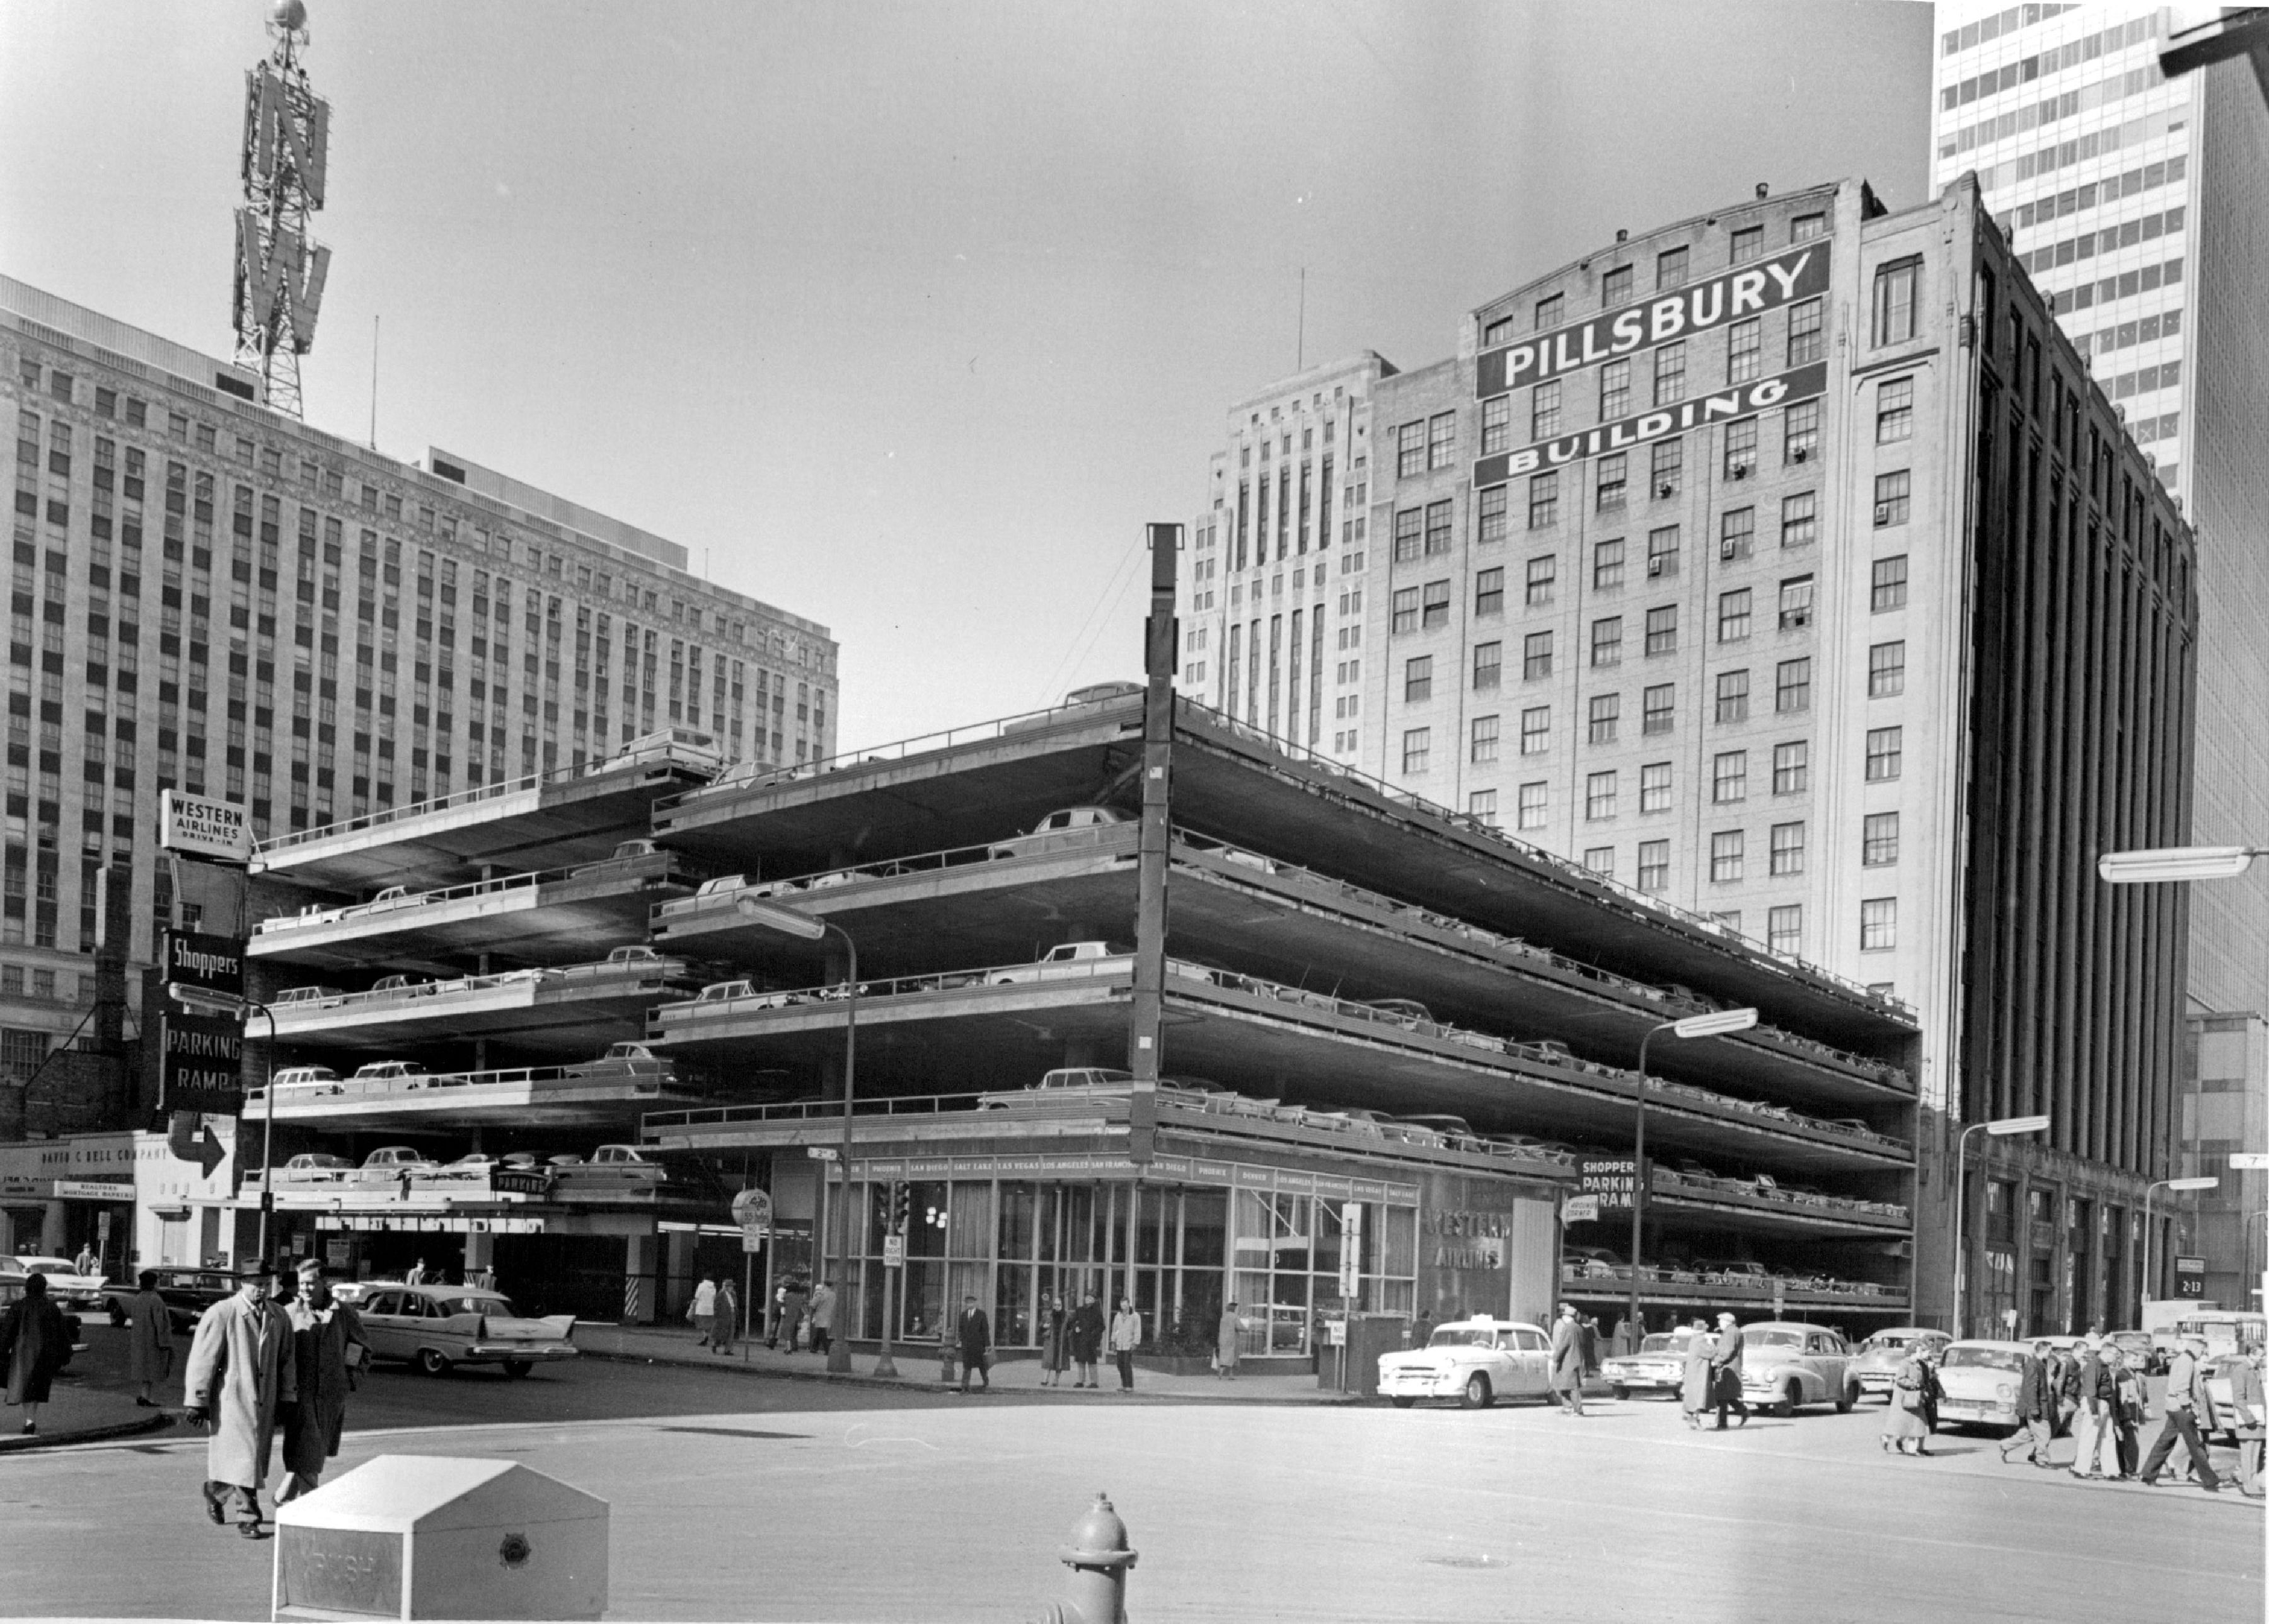 The 'Shoppers Parking Ramp' at 7th Street and 2nd Avenue South, photographed in 1960.